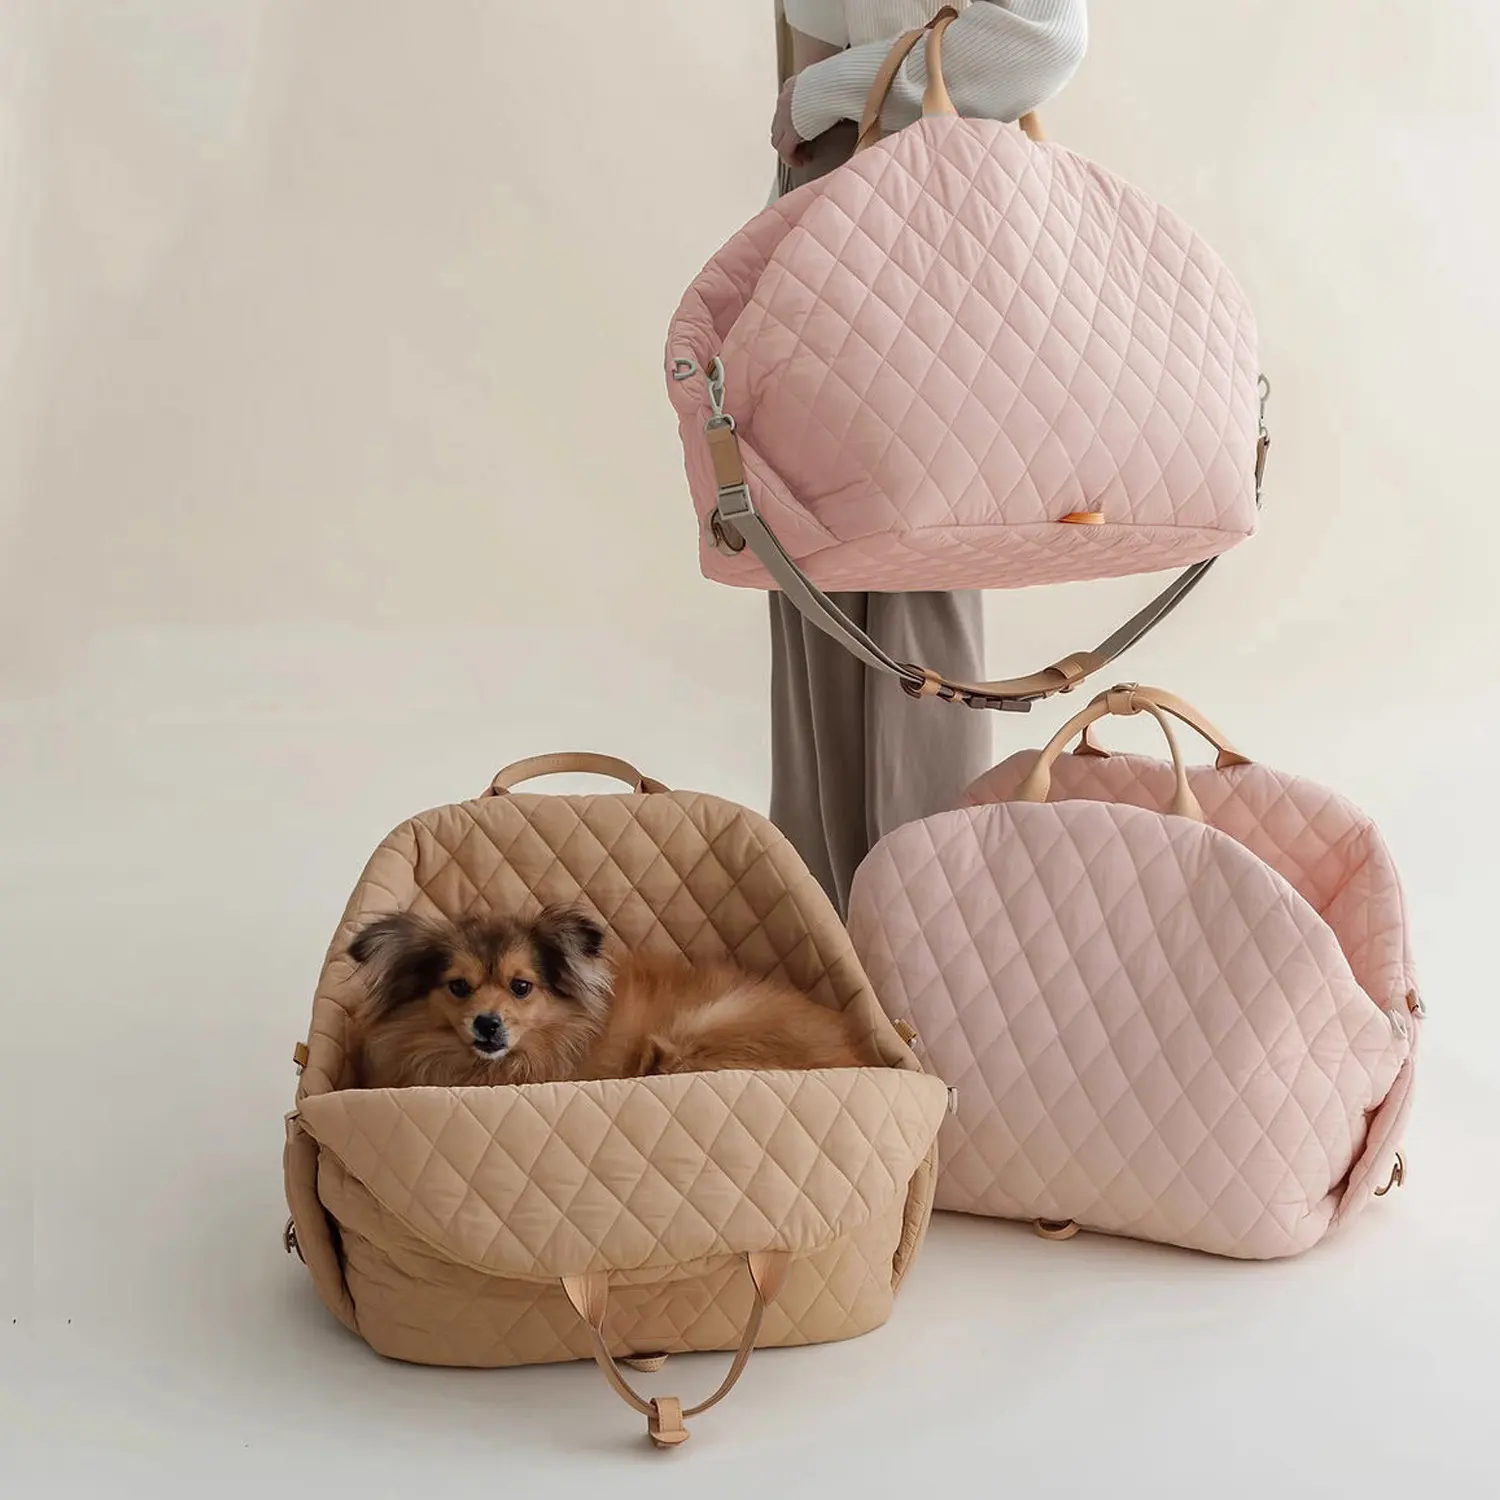 Luxury Multi-function Portable Soft-Sided Puppy Pet Carrier Tote Bag Small Dog Cat Carrier Purse Travel Bag for Outdoor